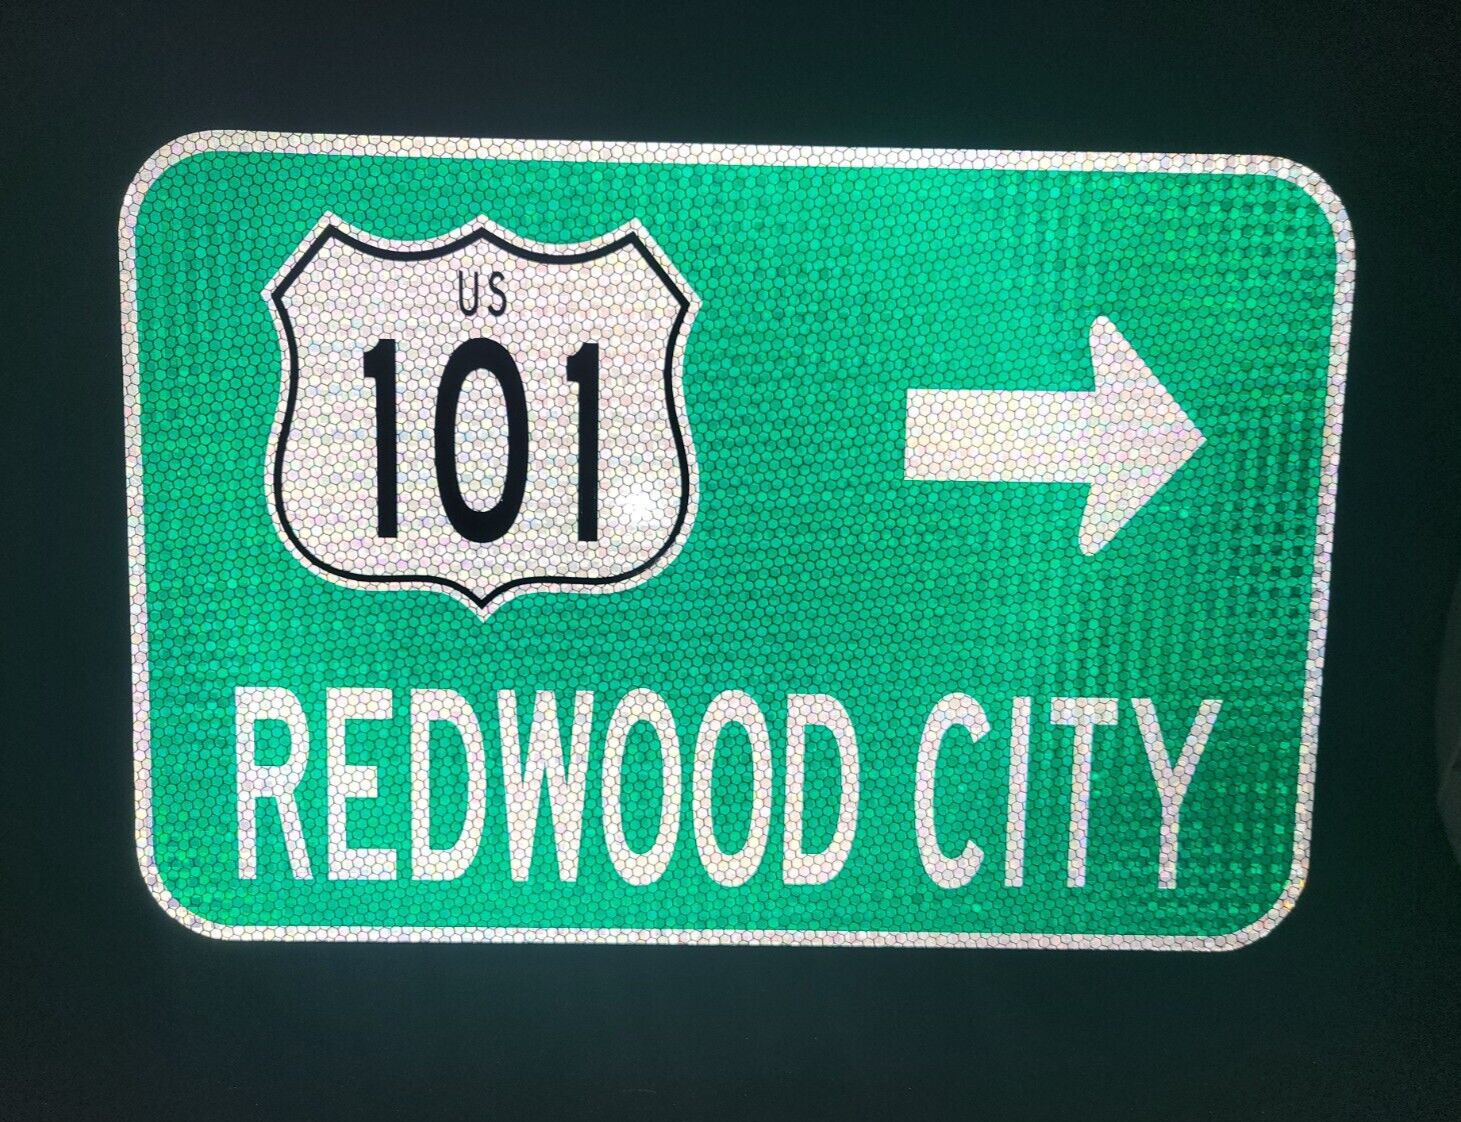 REDWOOD CITY Hwy 101 California route road sign, 18\